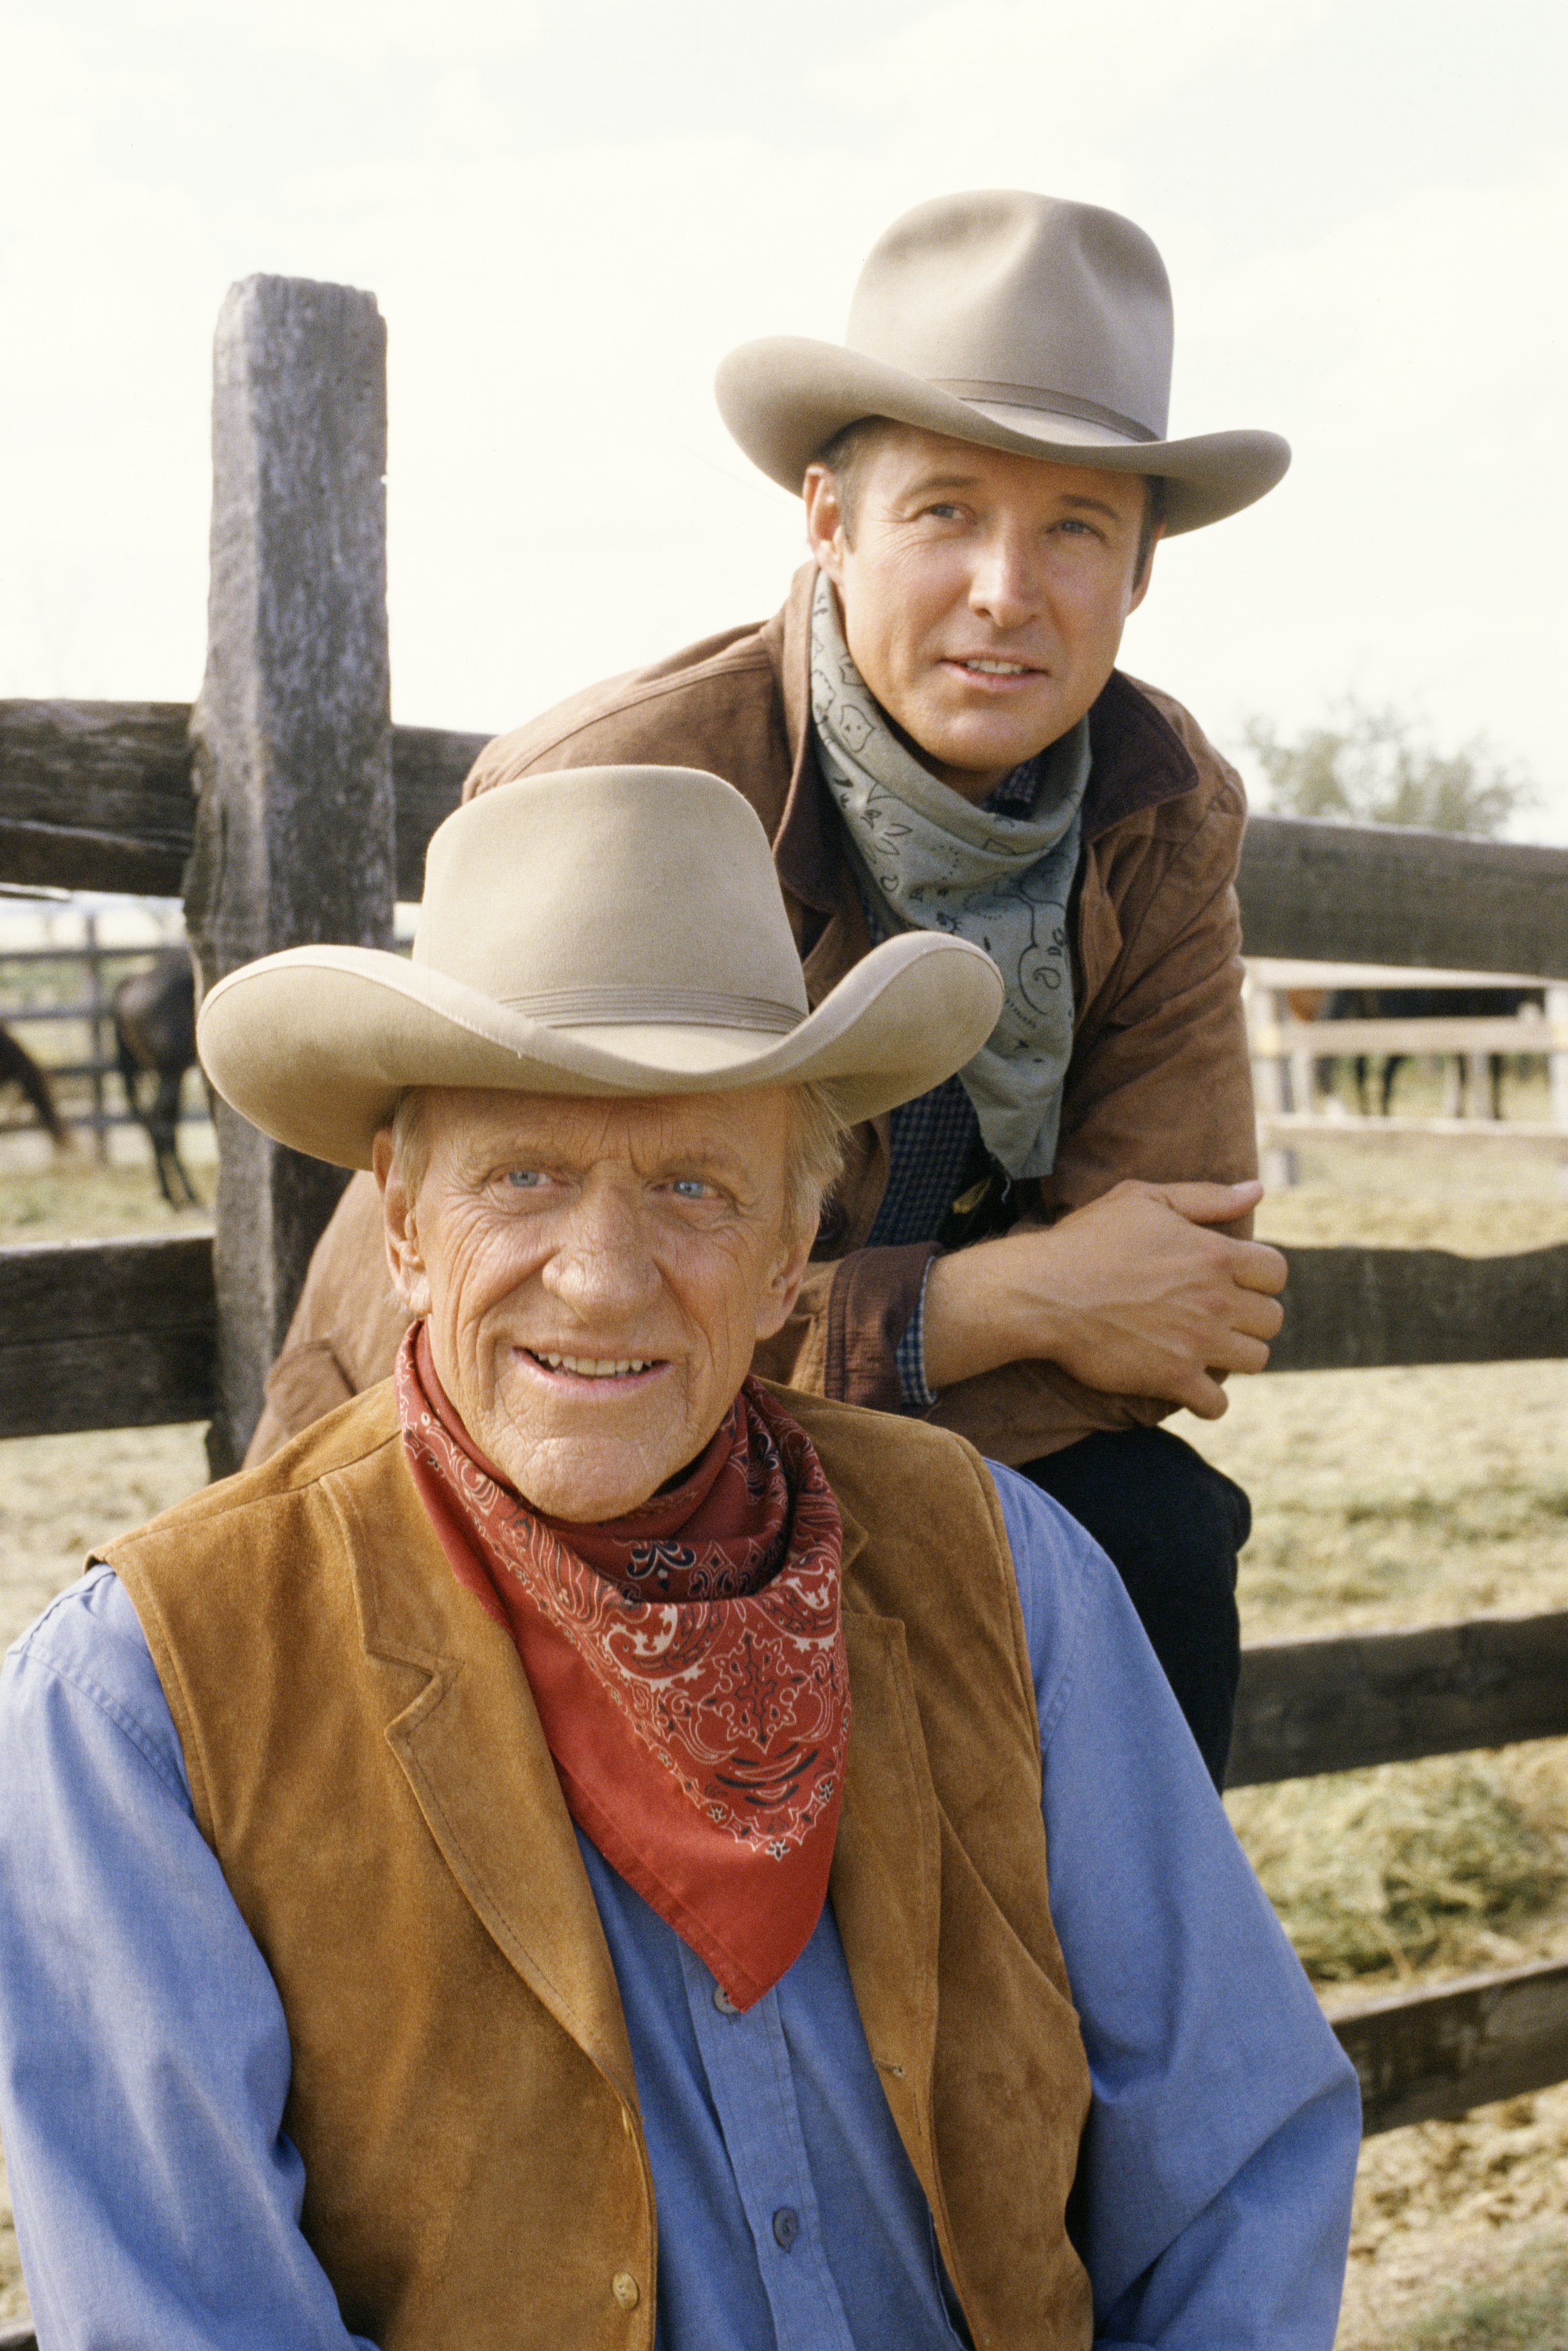 ne Mans Justice, a made-for-TV movie, featuring (from top) Bruce Boxleitner (as Davis Healy) and James Arness (as Matt Dillon). Image dated September 27, 1993. | Source: Getty Images